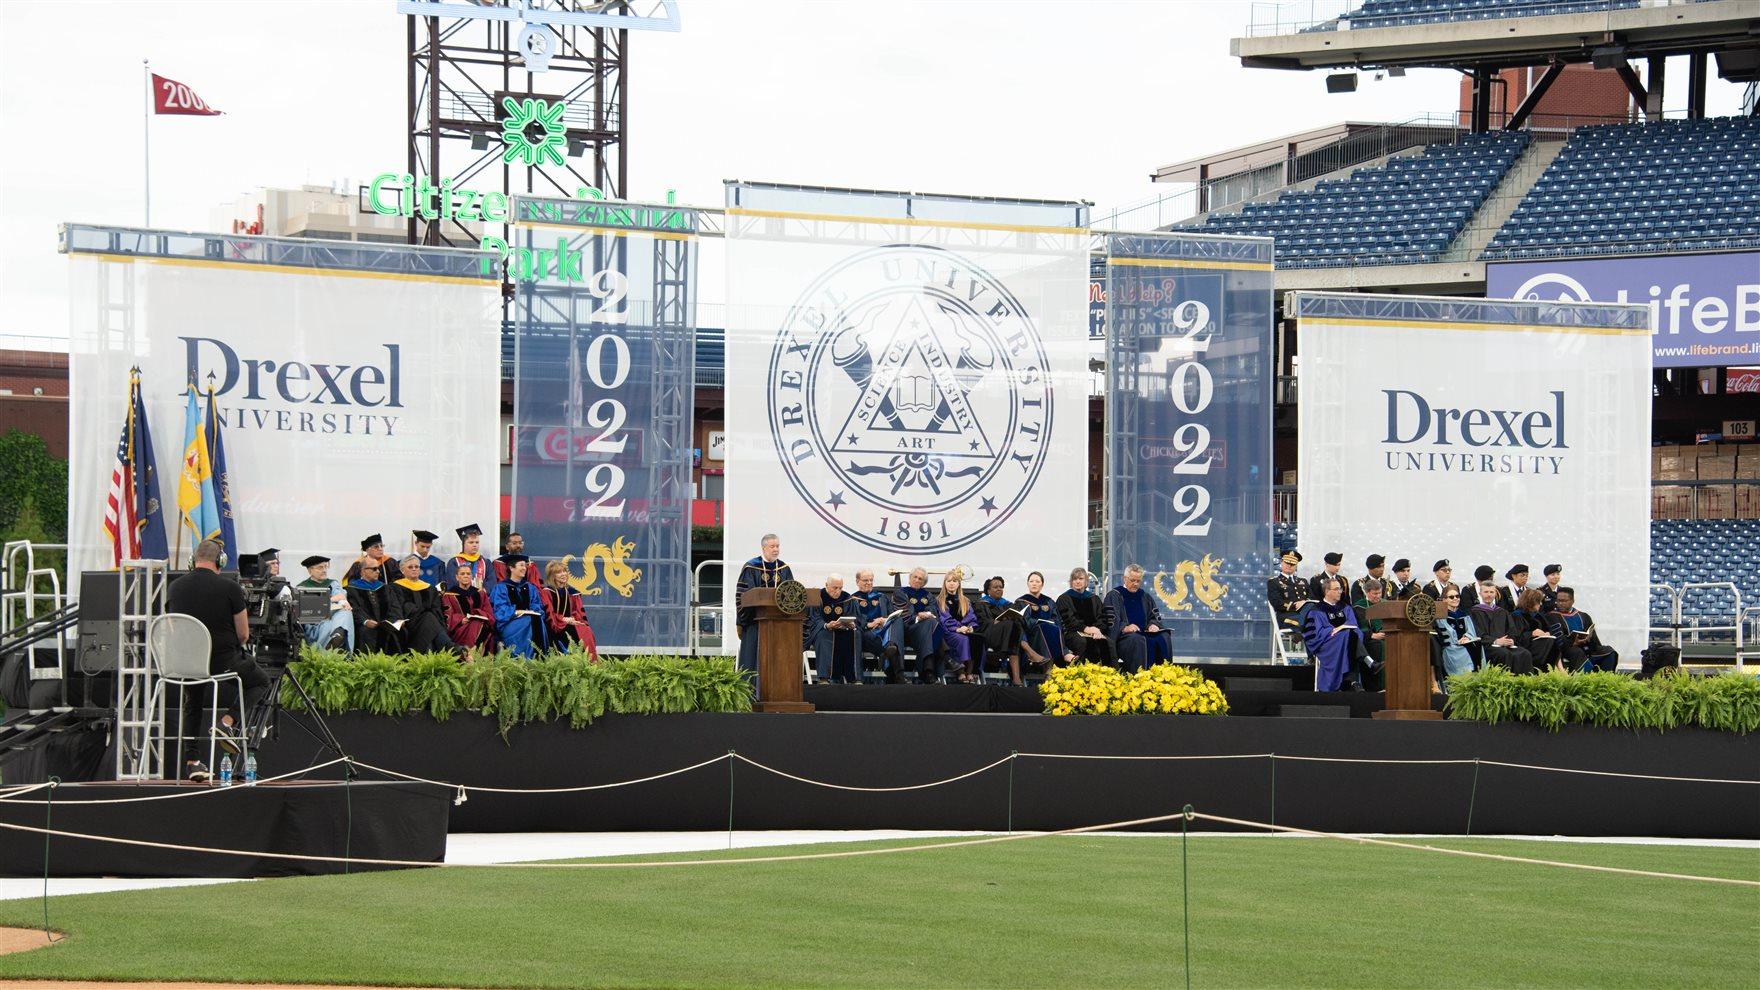 Drexel President John Fry on stage at Drexel's 2022 Commencement at Citizens Bank Park. Photo credit: Kelly & Massa Photography.